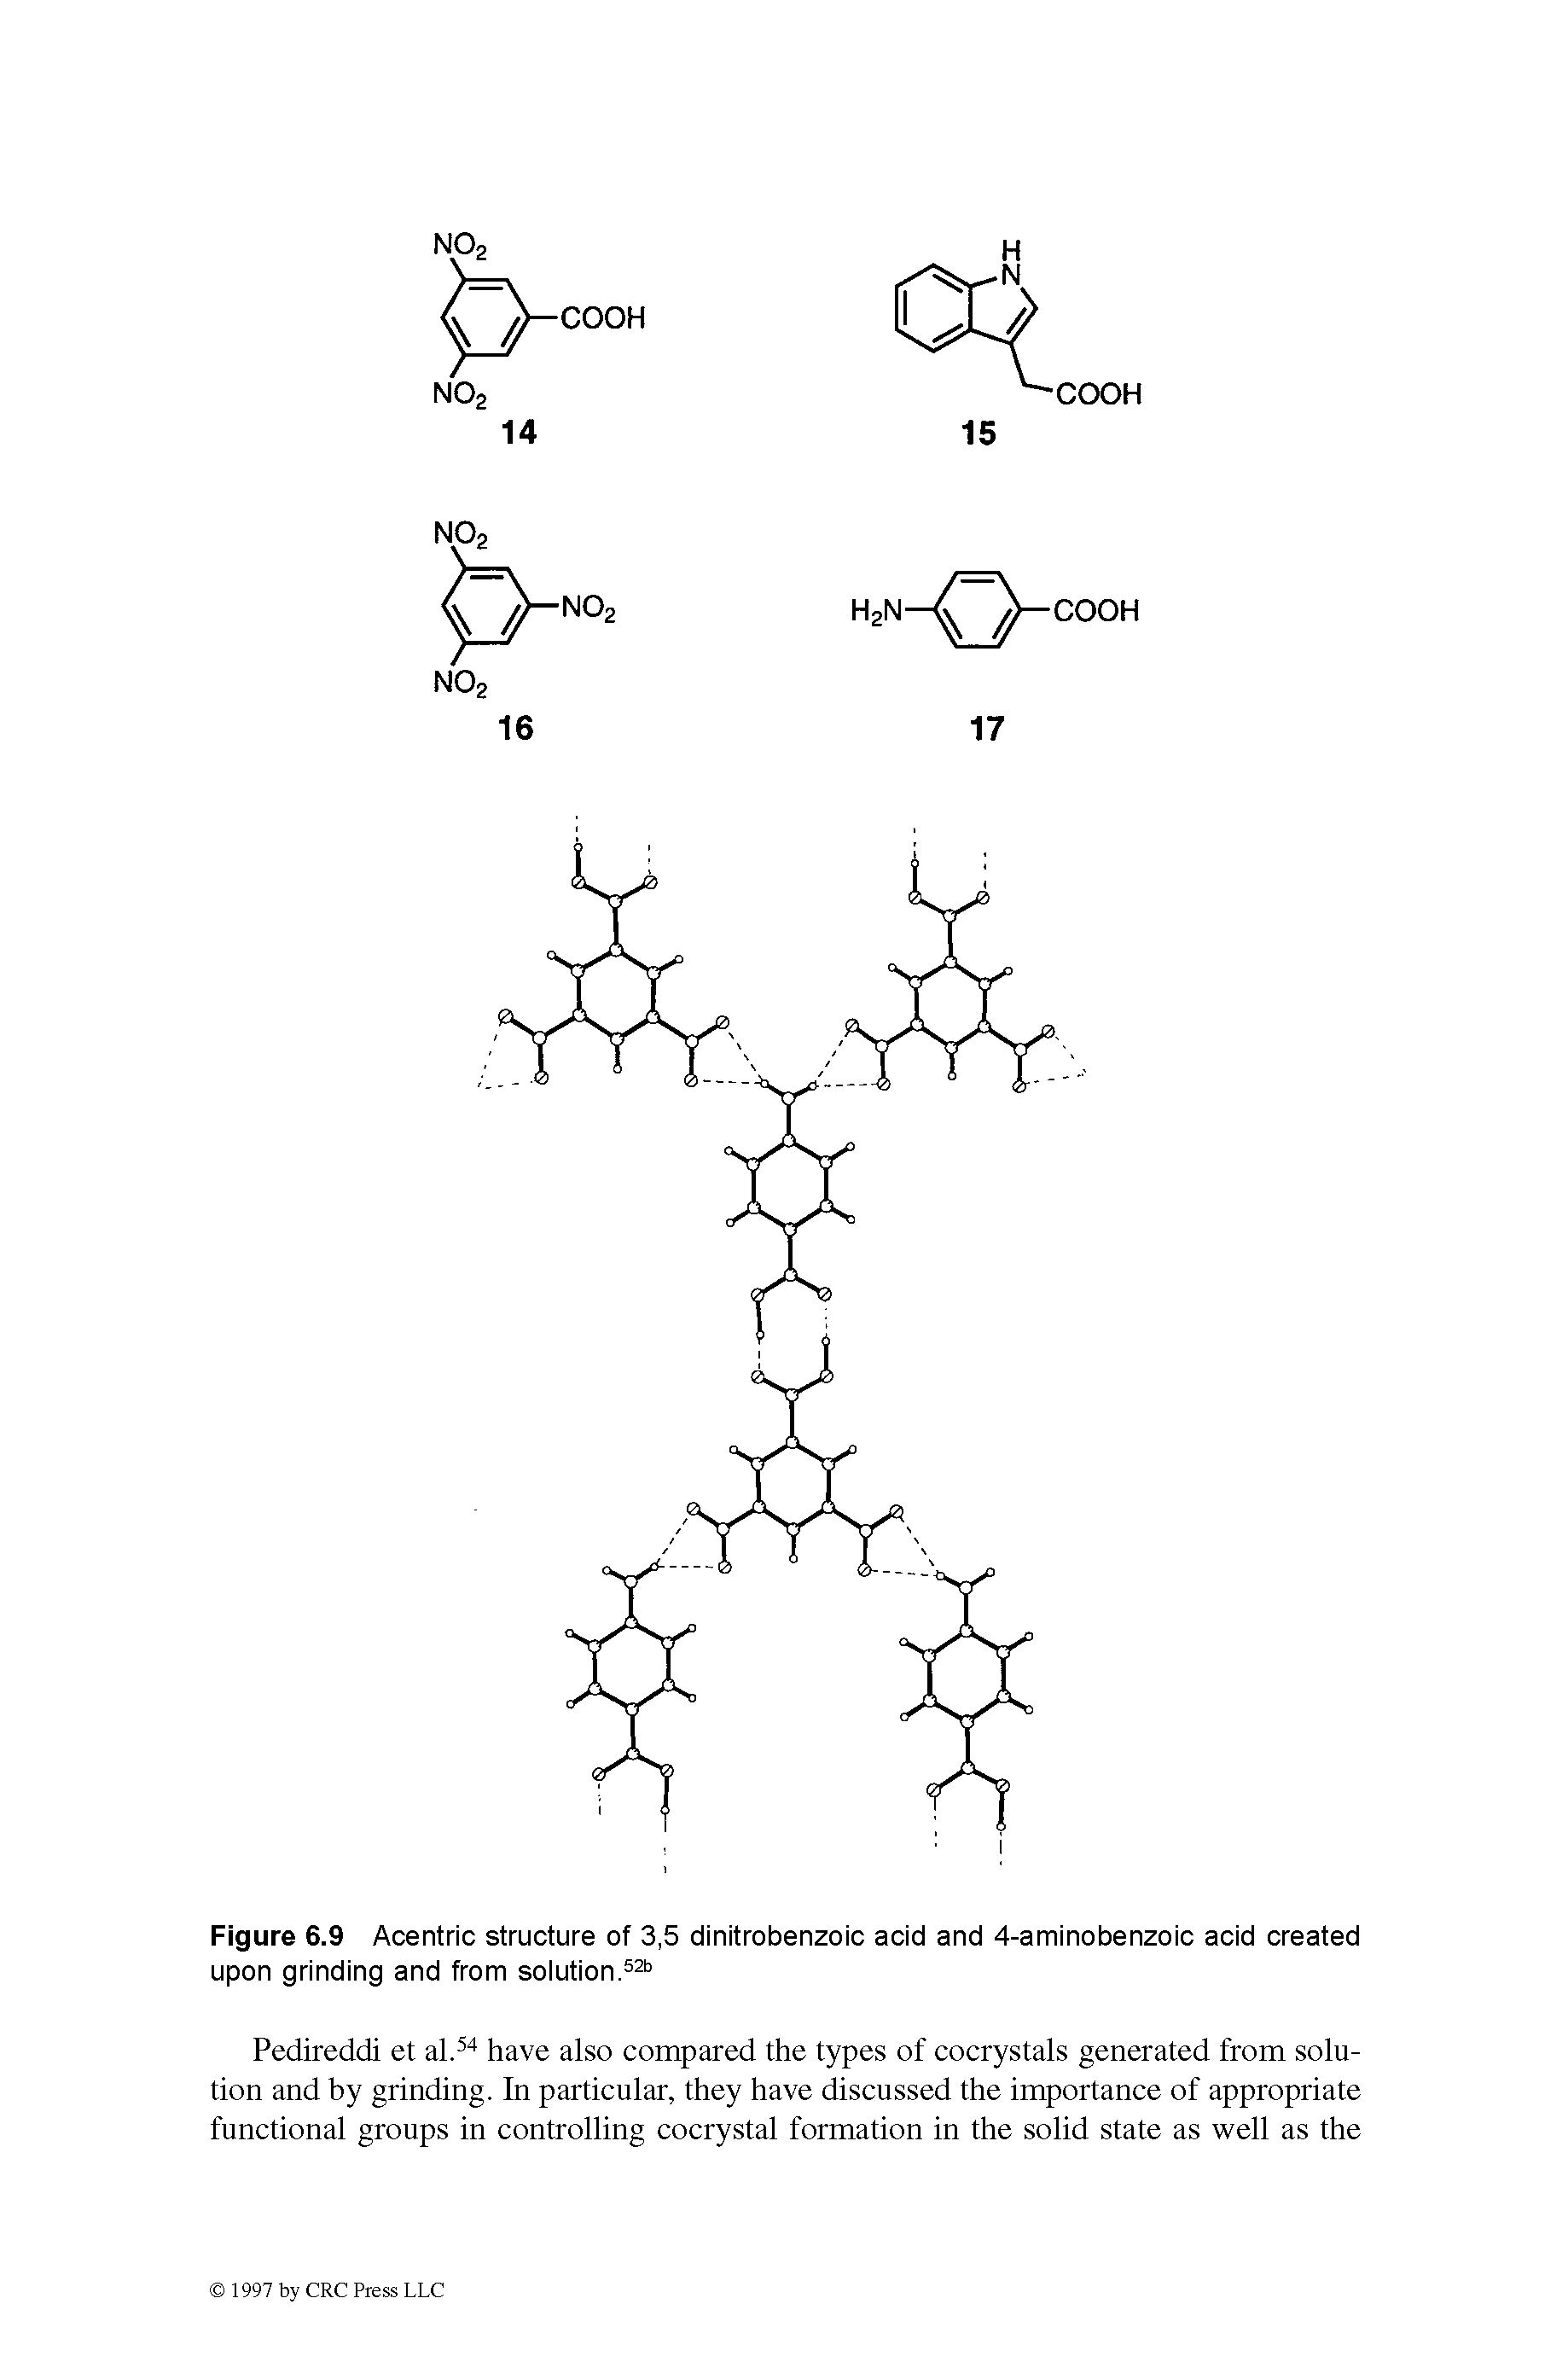 Figure 6.9 Acentric structure of 3,5 dinitrobenzoic acid and 4-aminobenzoic acid created upon grinding and from sciutionA "...